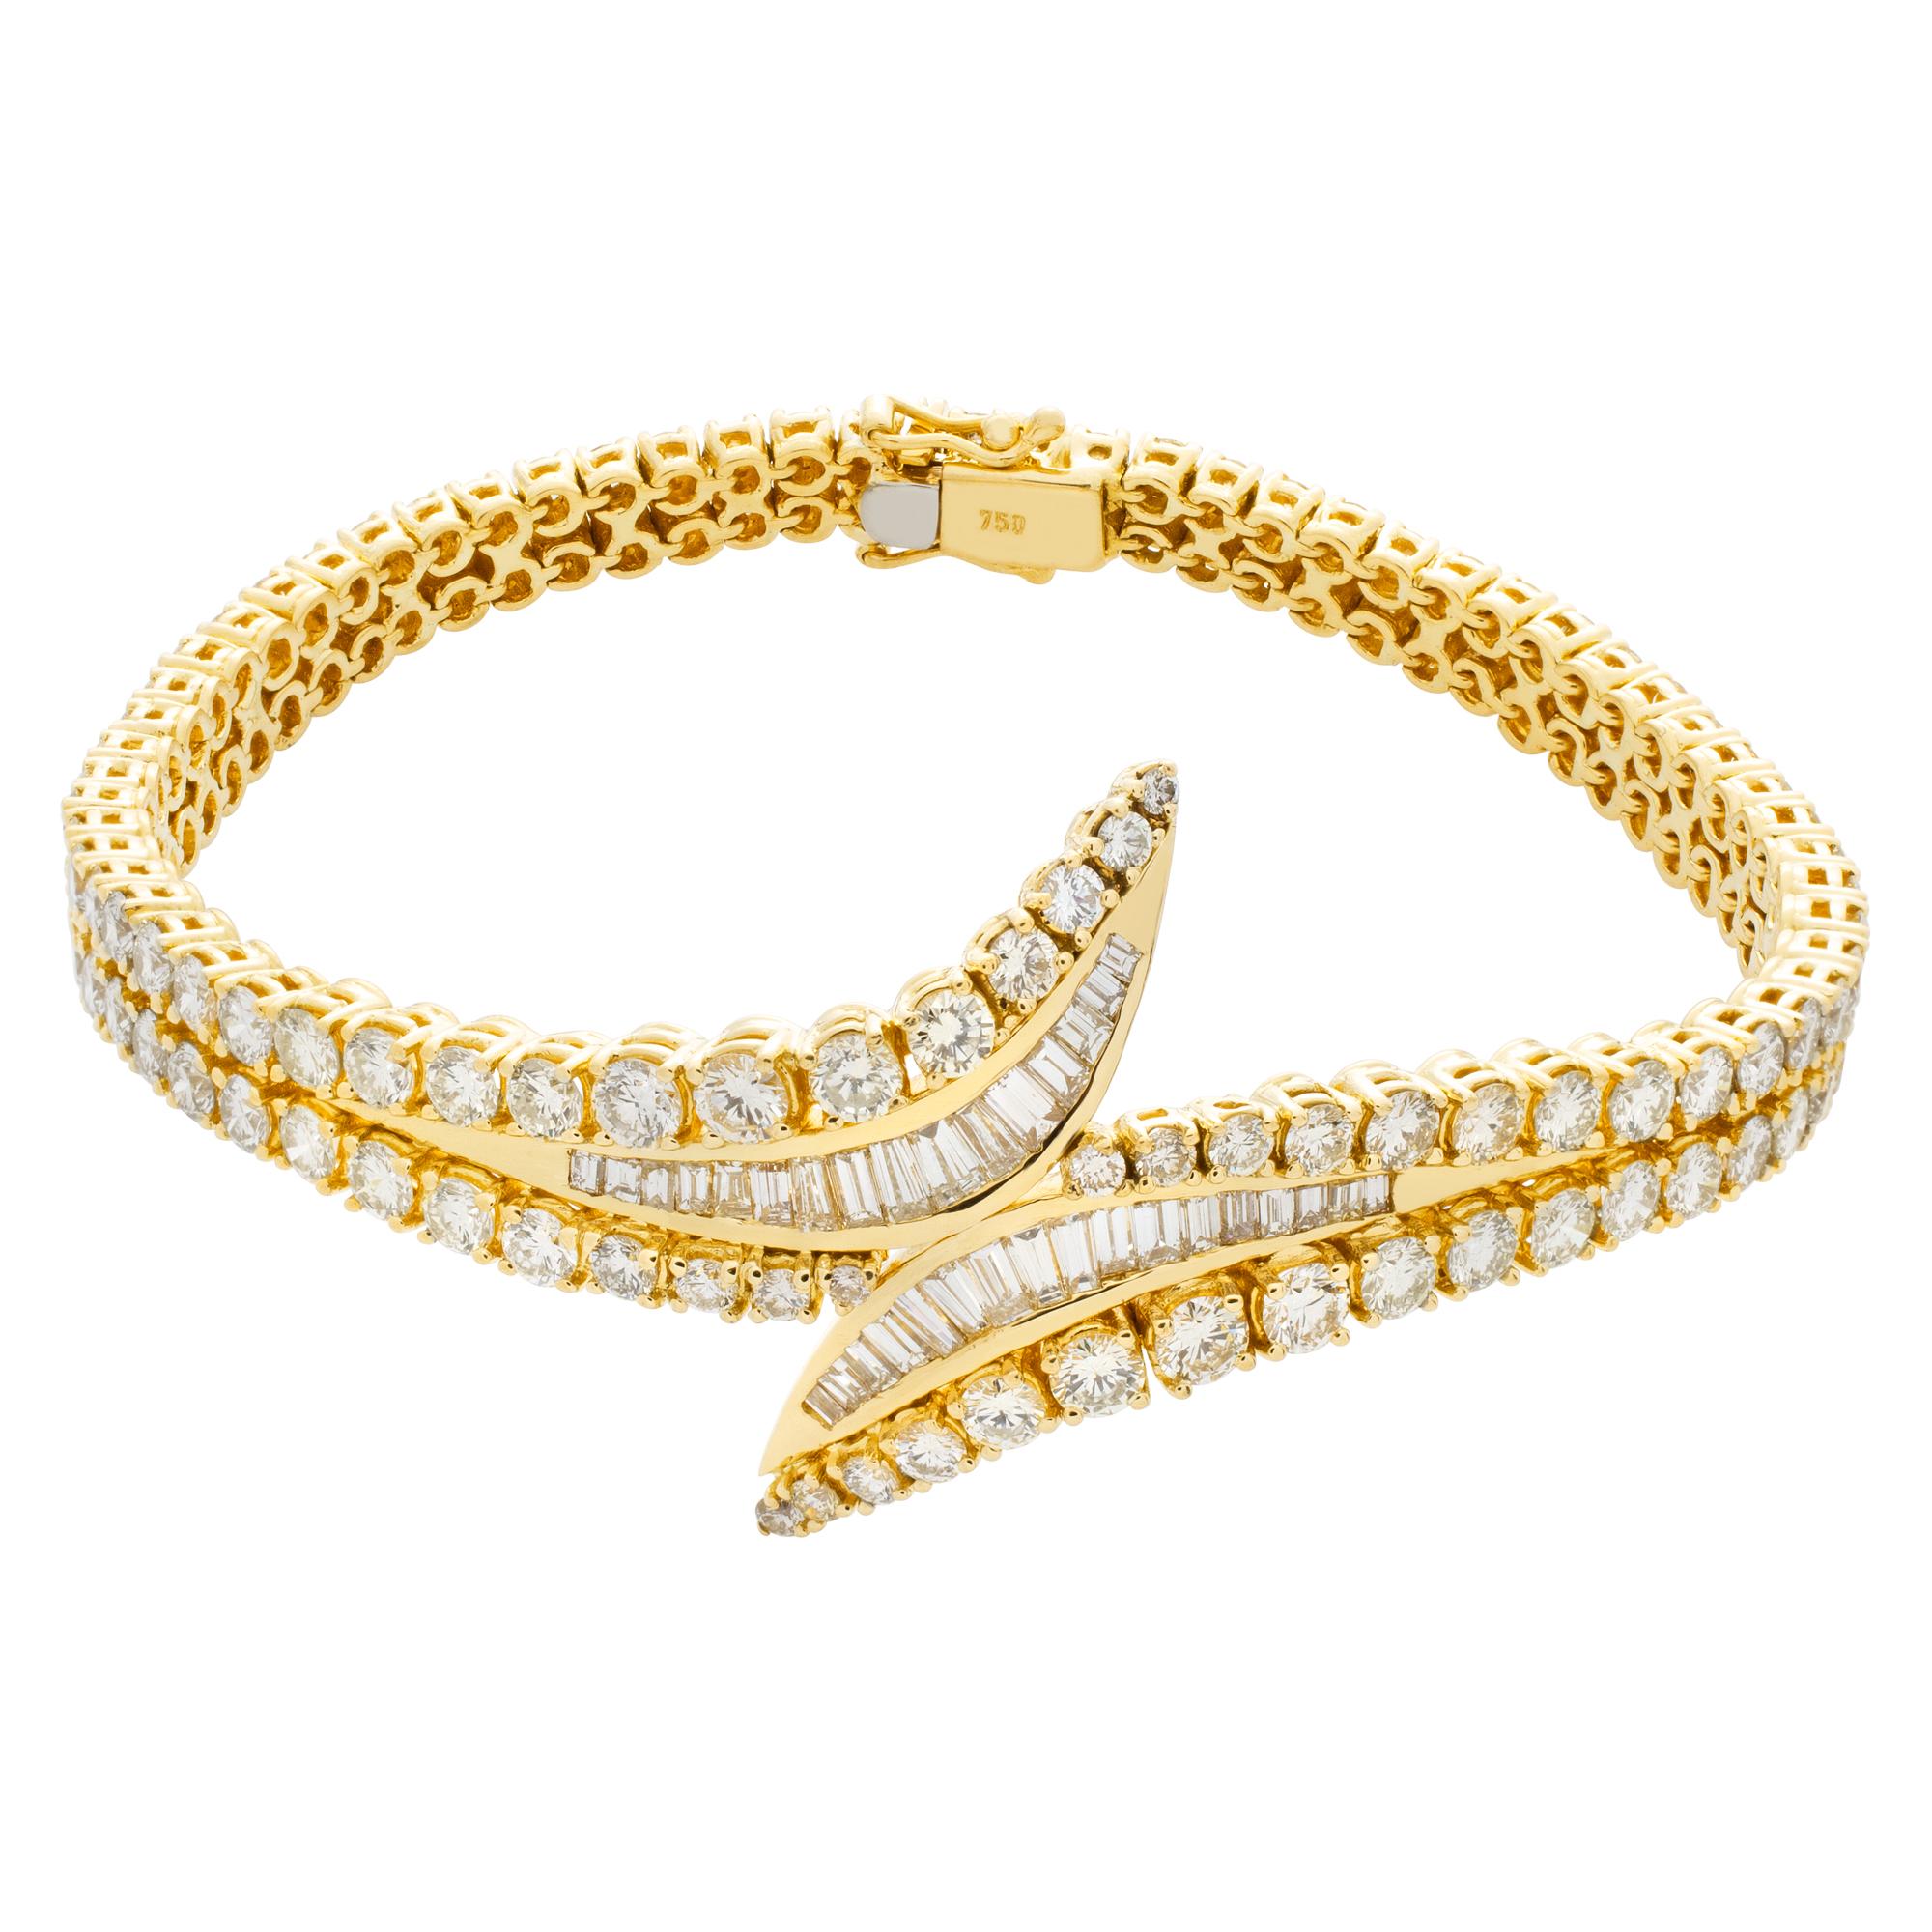 Women's or Men's Bracelet in 18k Yellow Gold with over 9 Carats in Round Brilliant Cut Diamonds For Sale